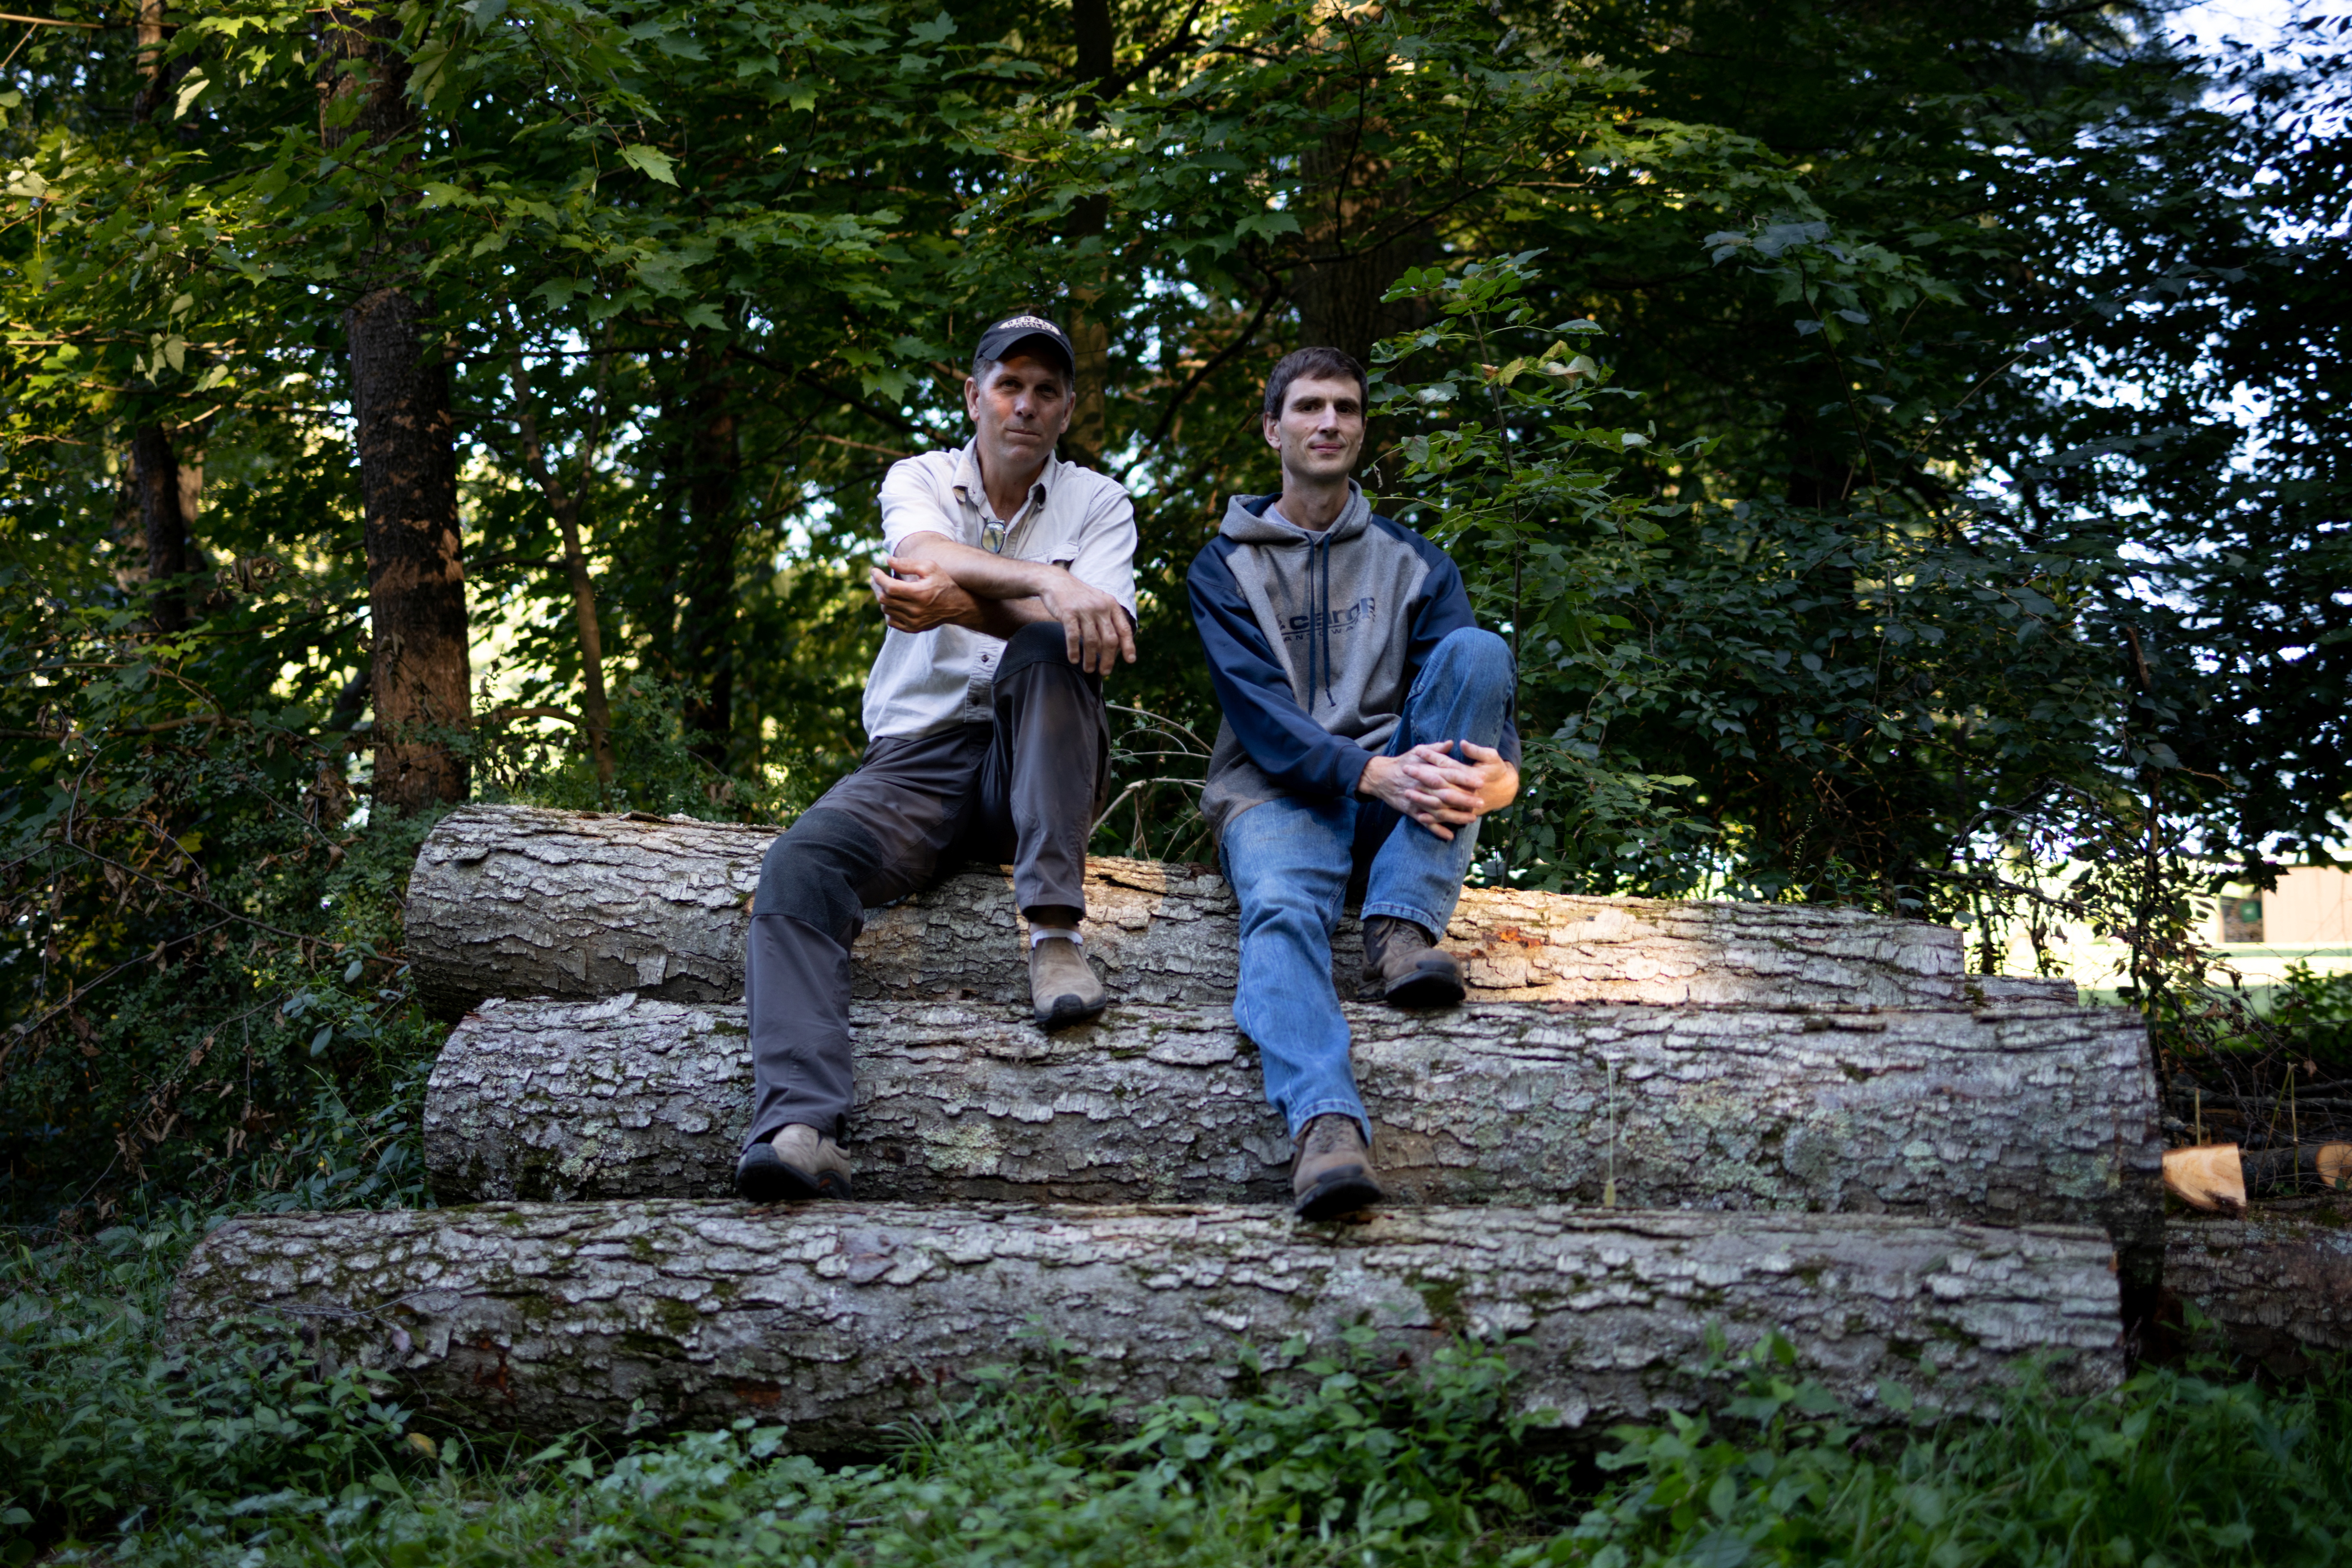 After 9/11, two arborists joined the grim task of collecting evidence in the woods of Shanksville